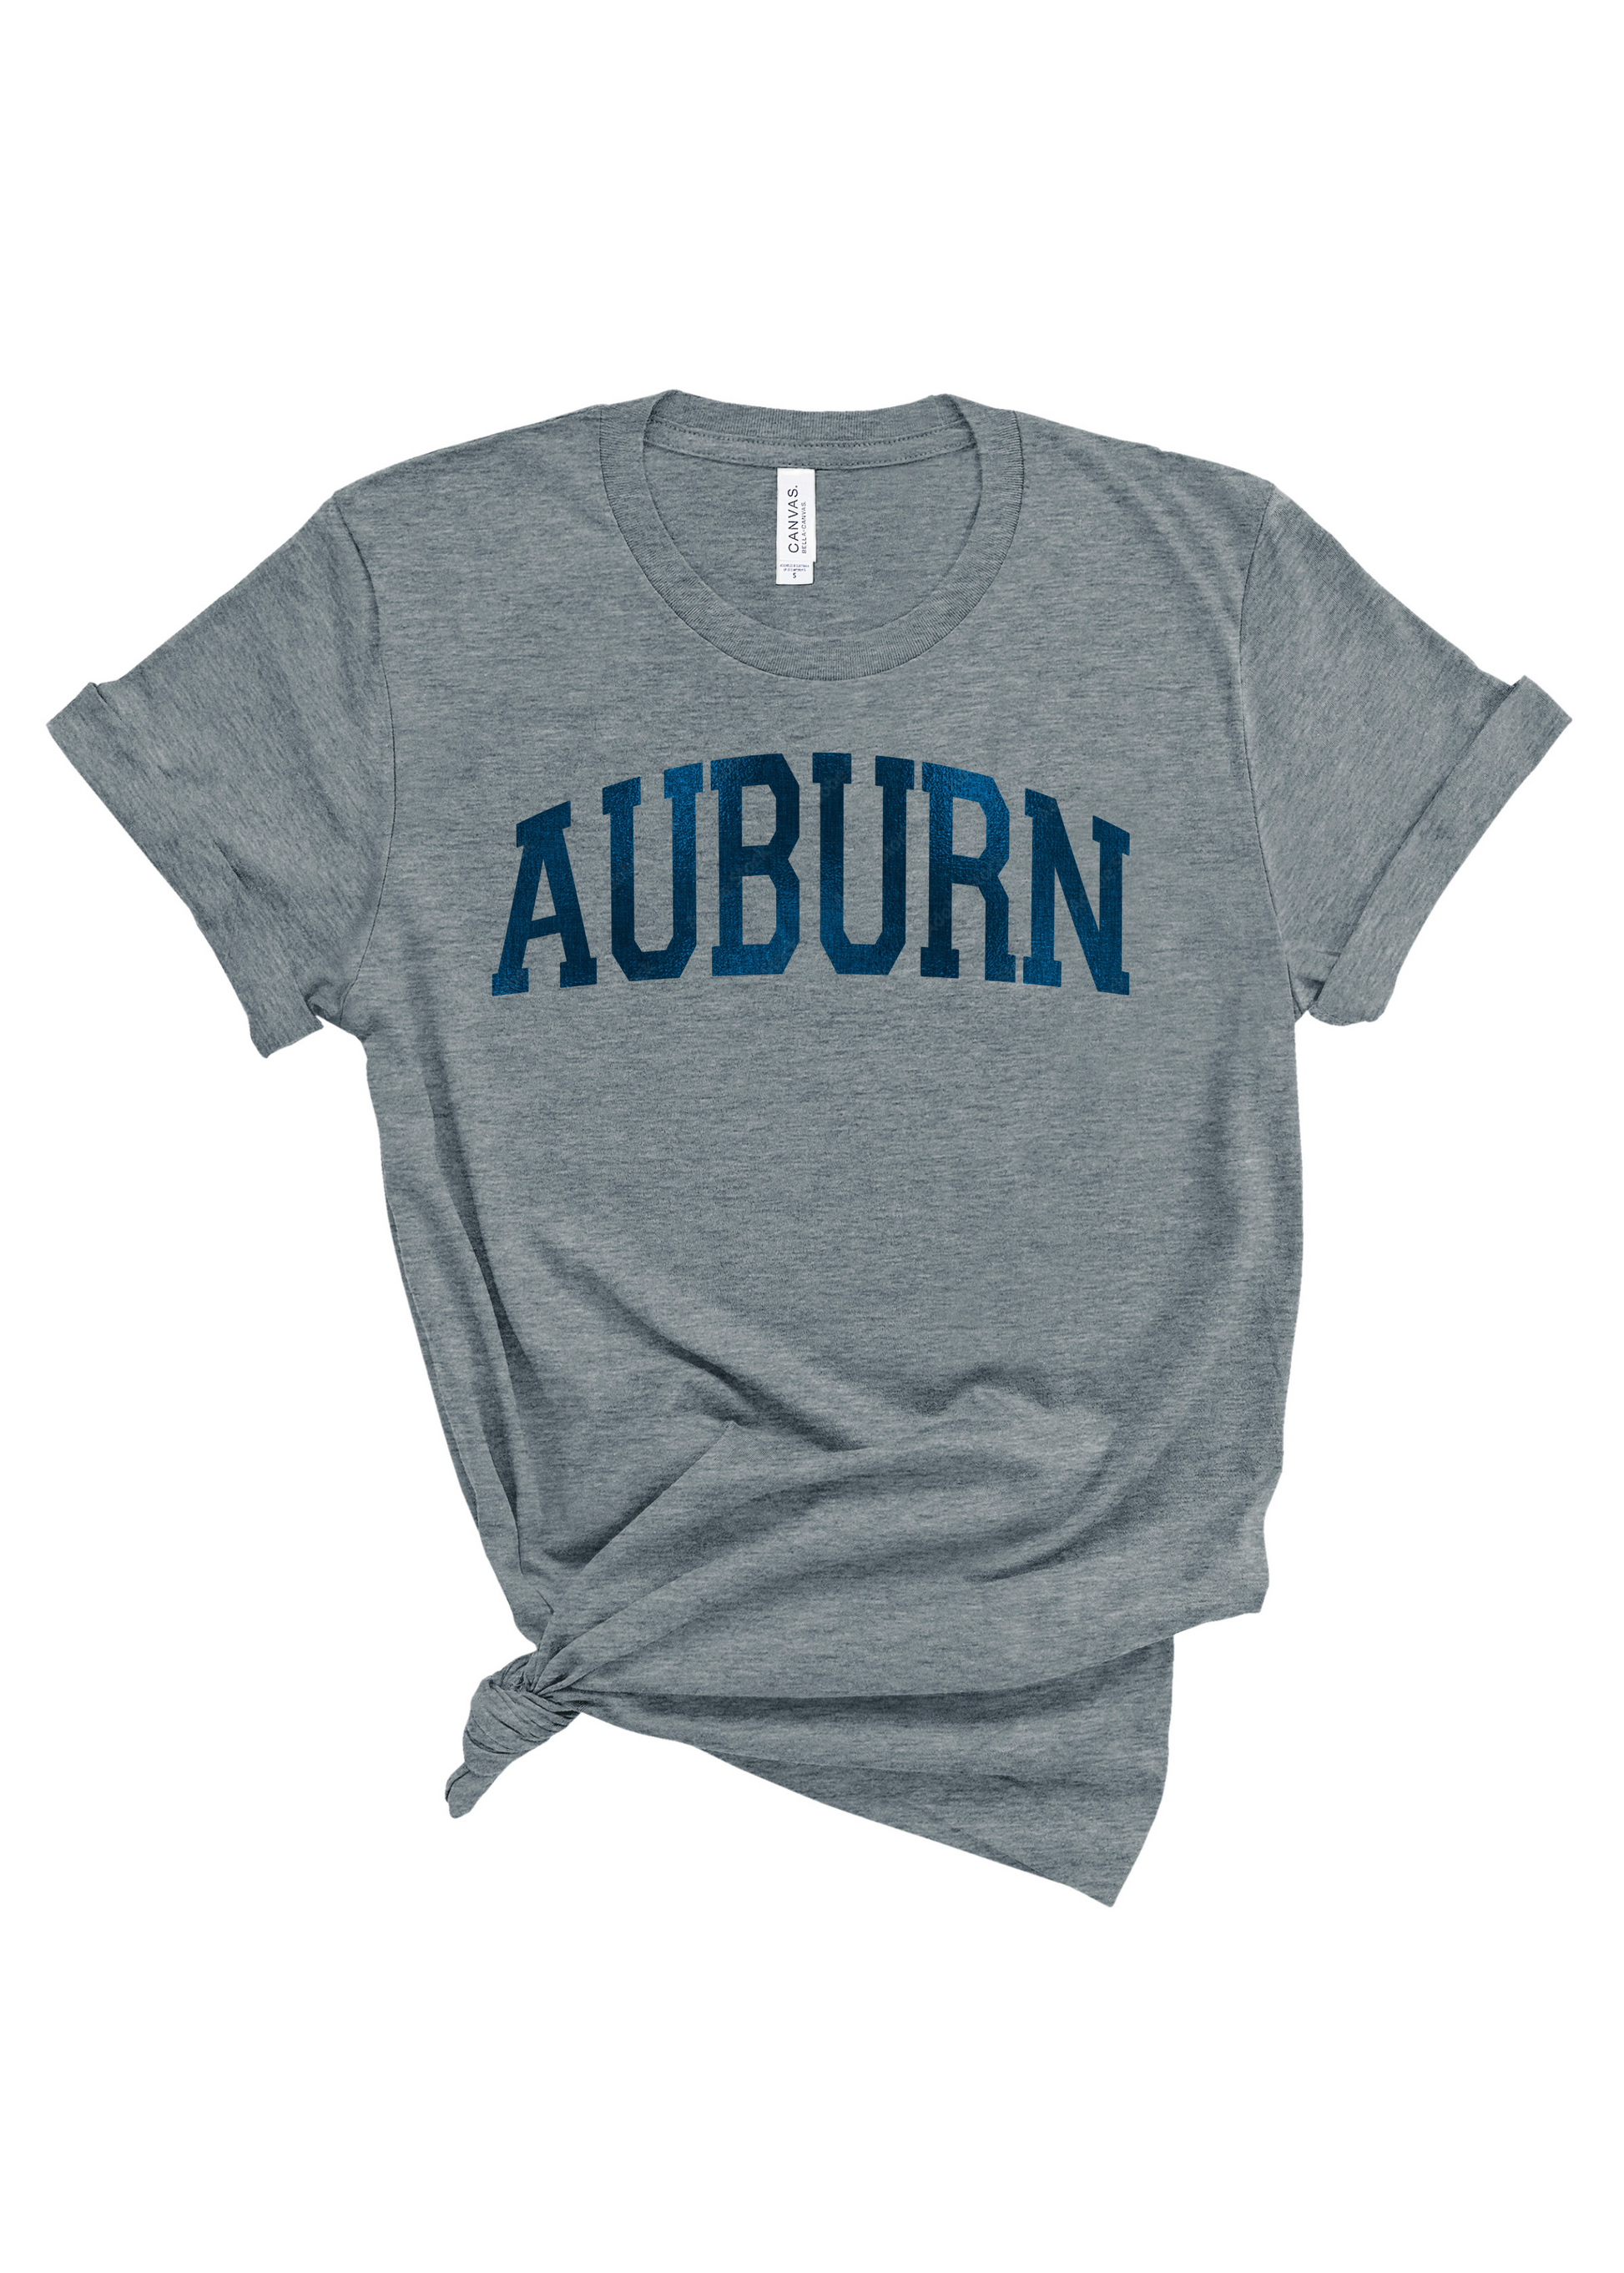 Auburn Foil | Adult Tee-Adult Tee-Sister Shirts-Sister Shirts, Cute & Custom Tees for Mama & Littles in Trussville, Alabama.